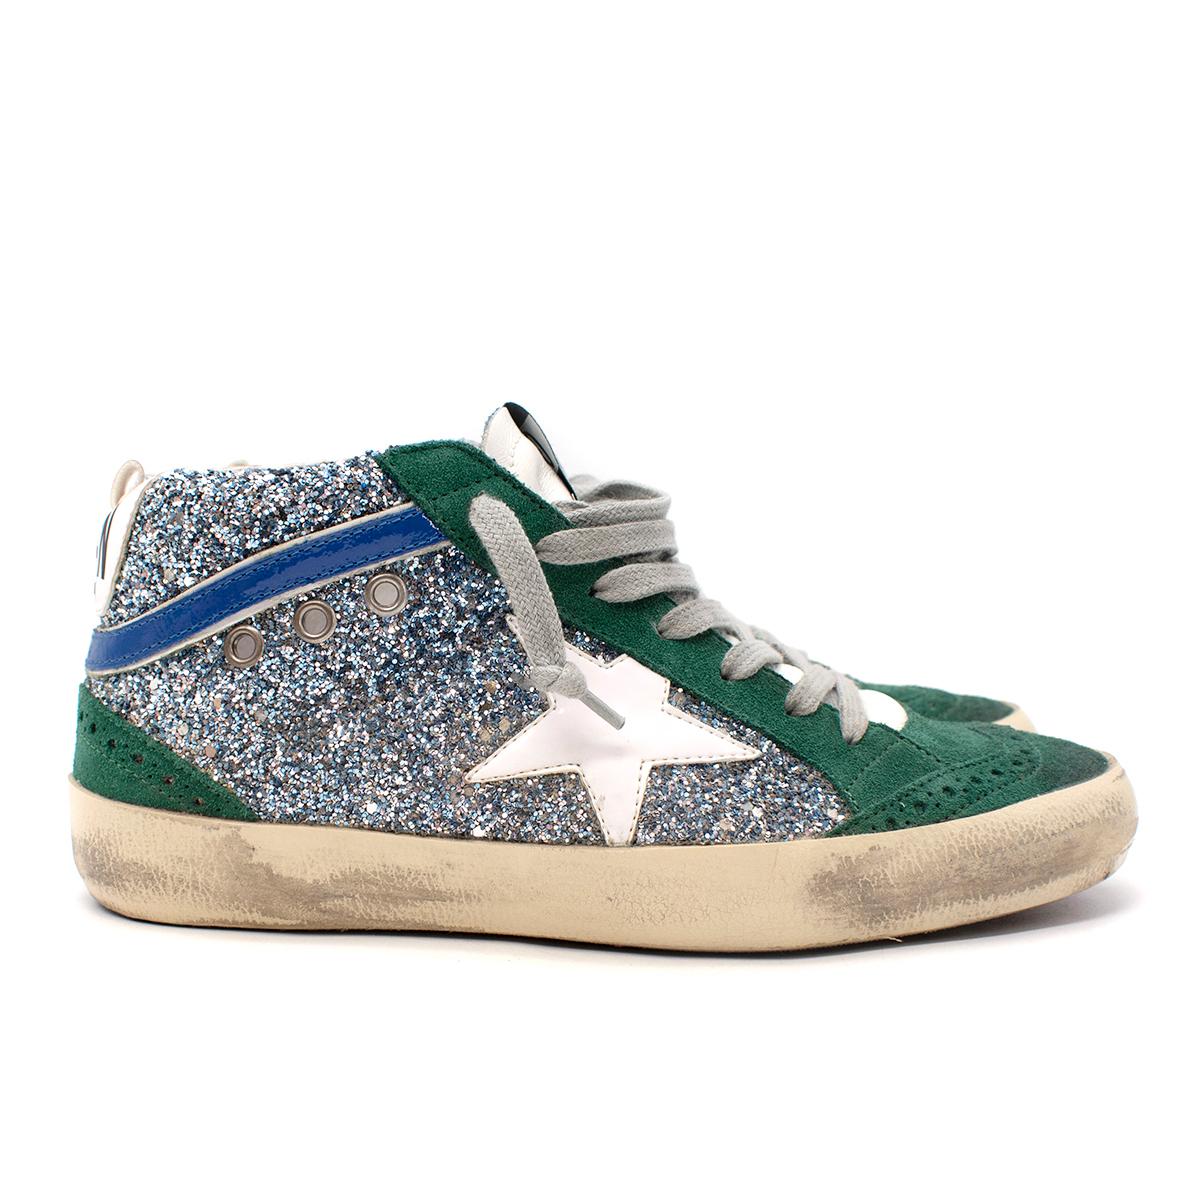 Golden Goose Mid Star Green Suede & Silver Glitter High Top Trainers
 

 - Cult Mid Star style, with green suede upper contrasted with textured silver glitter side panels embellished with the signature GGDB star in white leater
 - Logo branding to